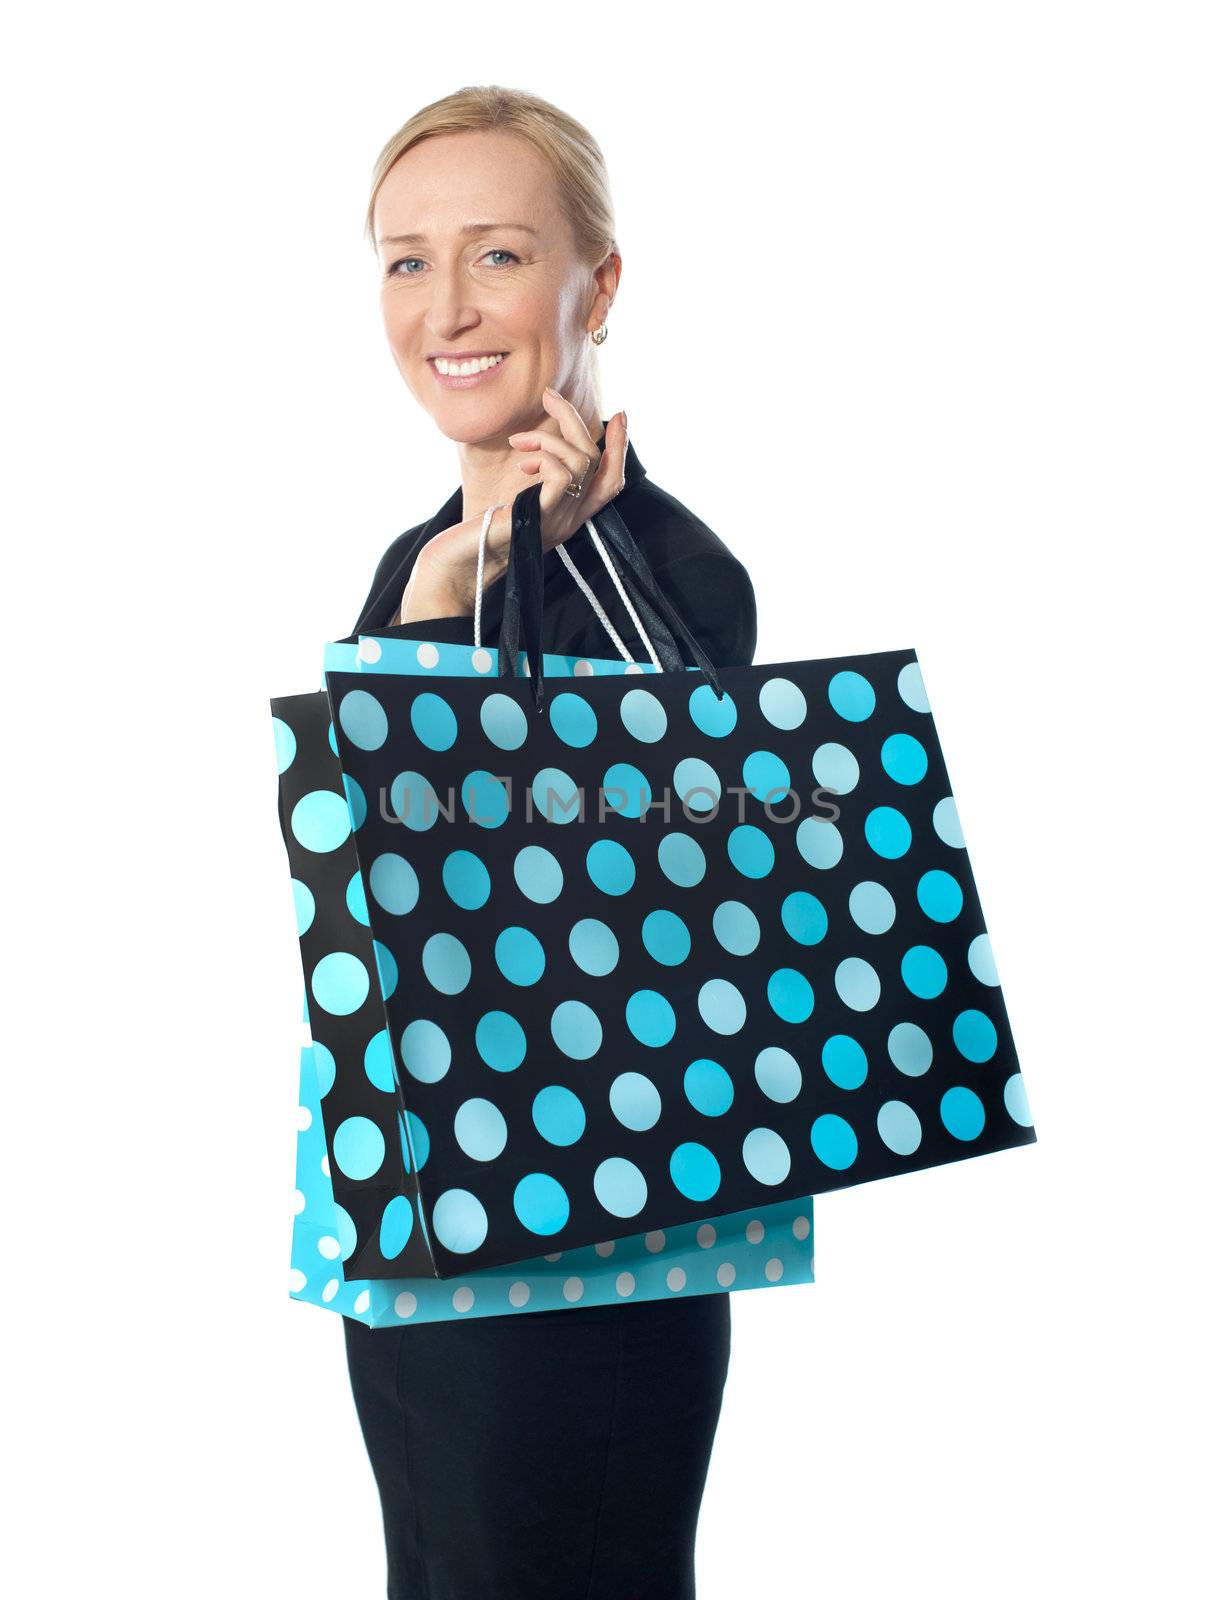 Senior woman posing with dotted shopping bag by stockyimages